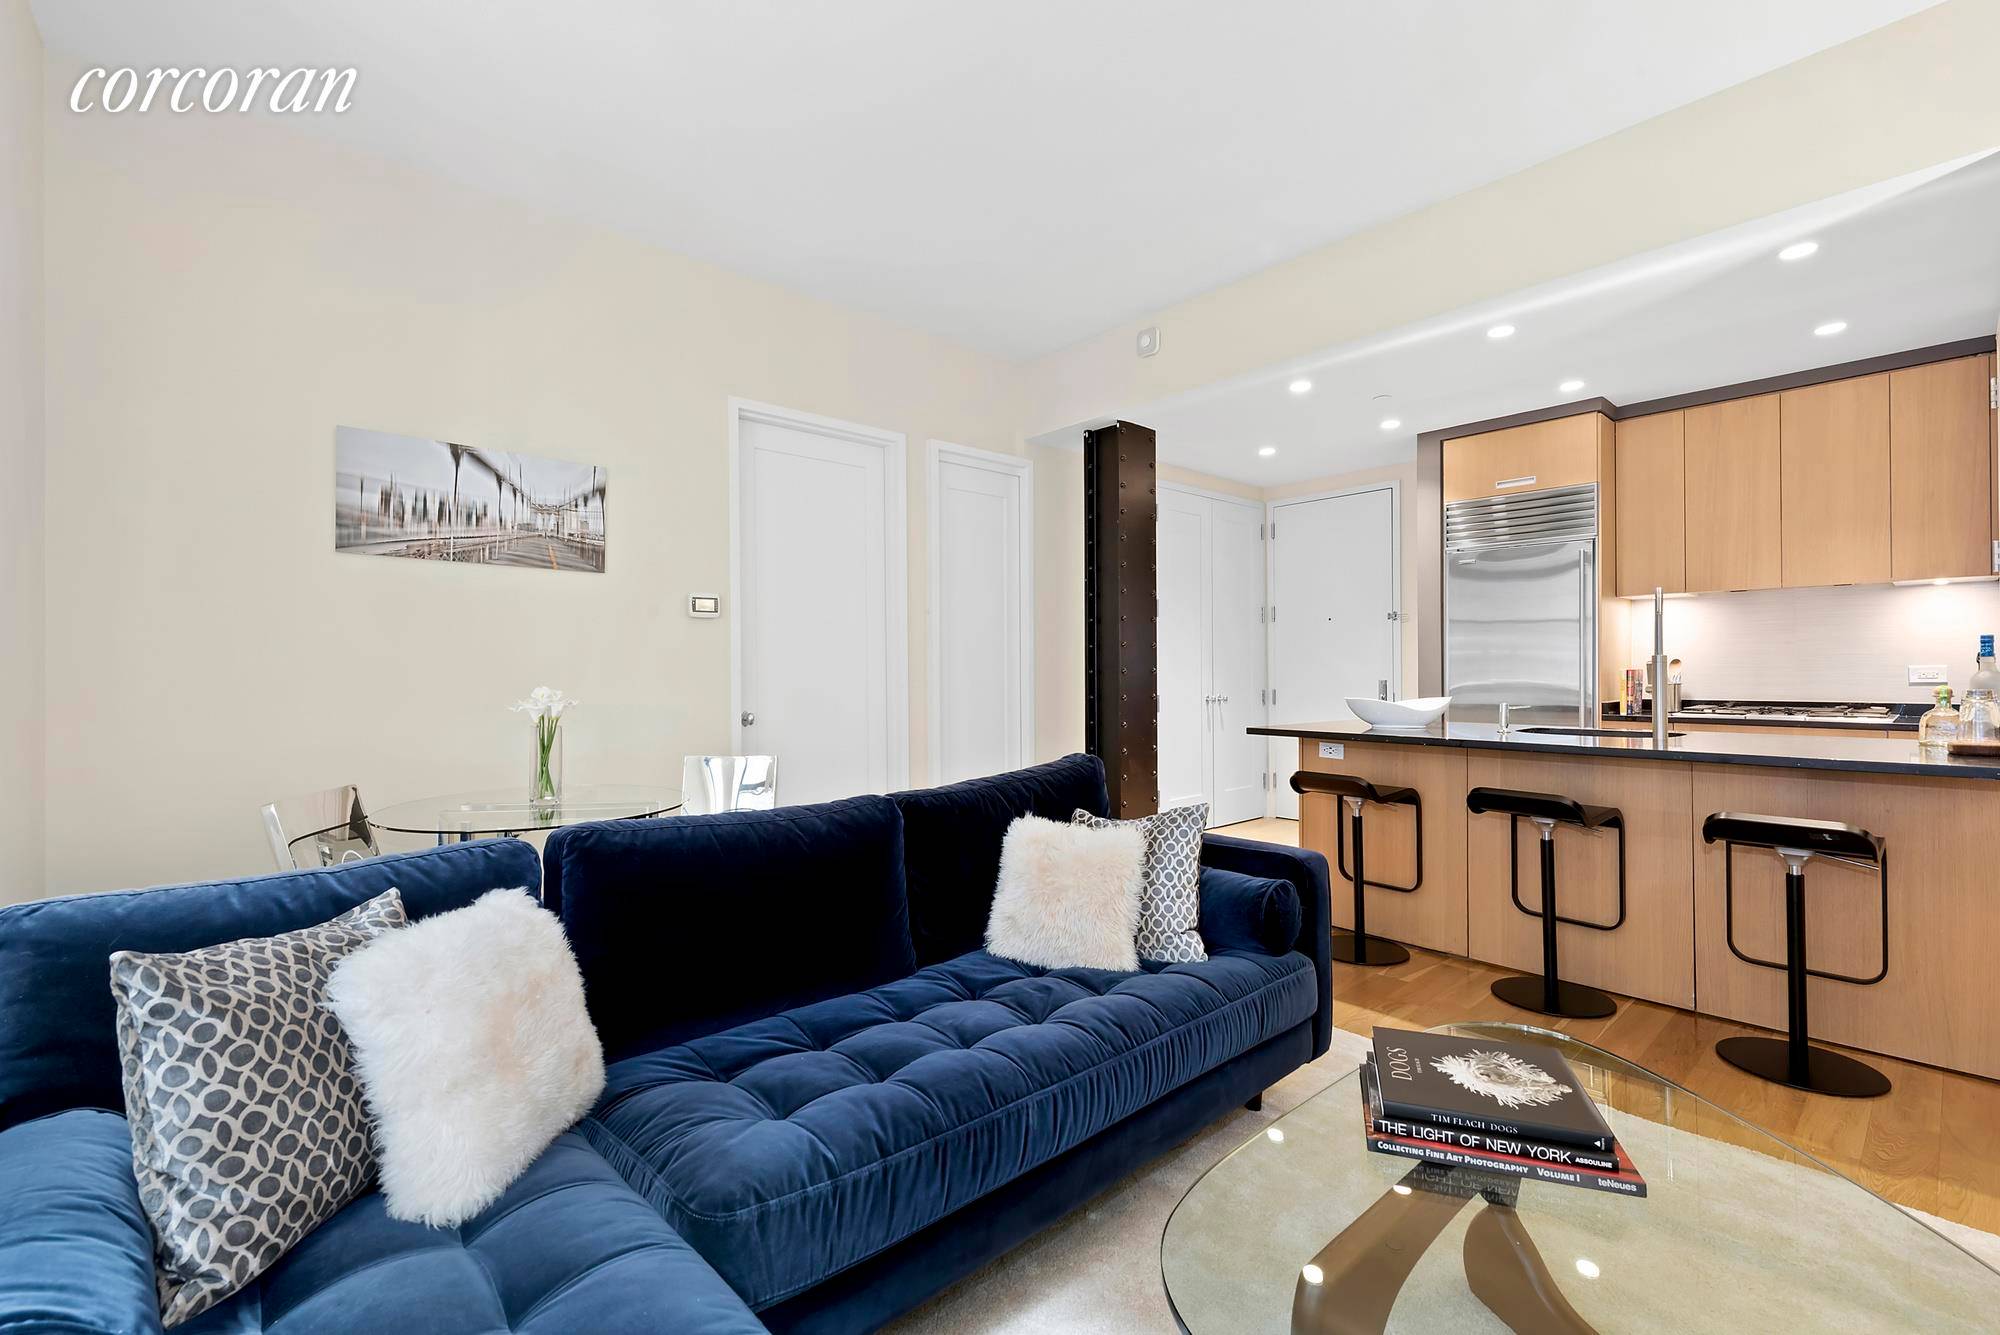 Exceptional Value for Light Lovers in Historic Downtown Loft conversion Framed by 10 foot ceilings, this airy space is flooded with southern light.